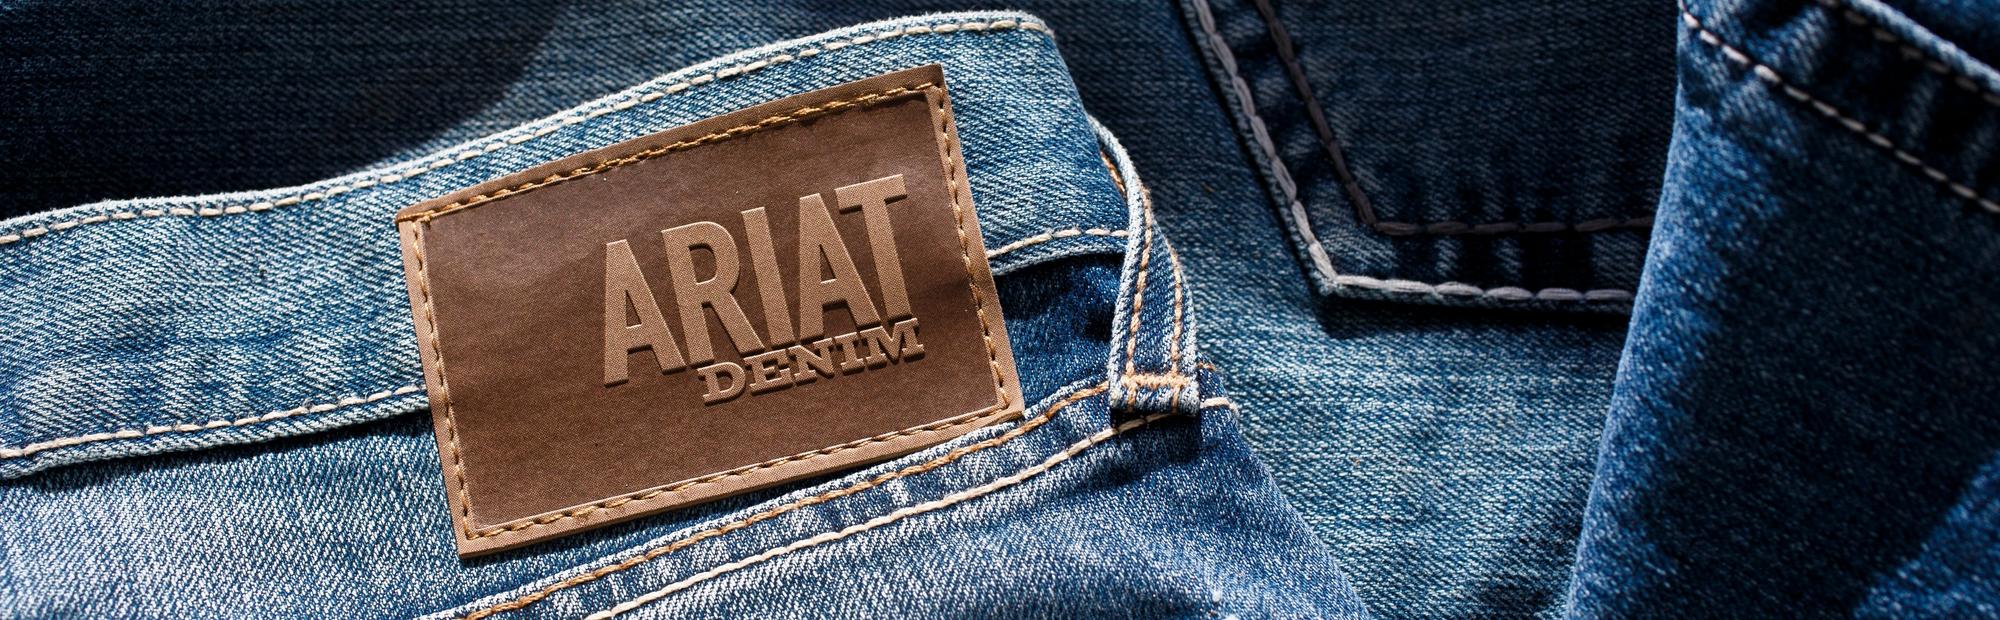 Iron on Patches for Jeans - Extra Large Patches for Clothes Denim Patches  fo